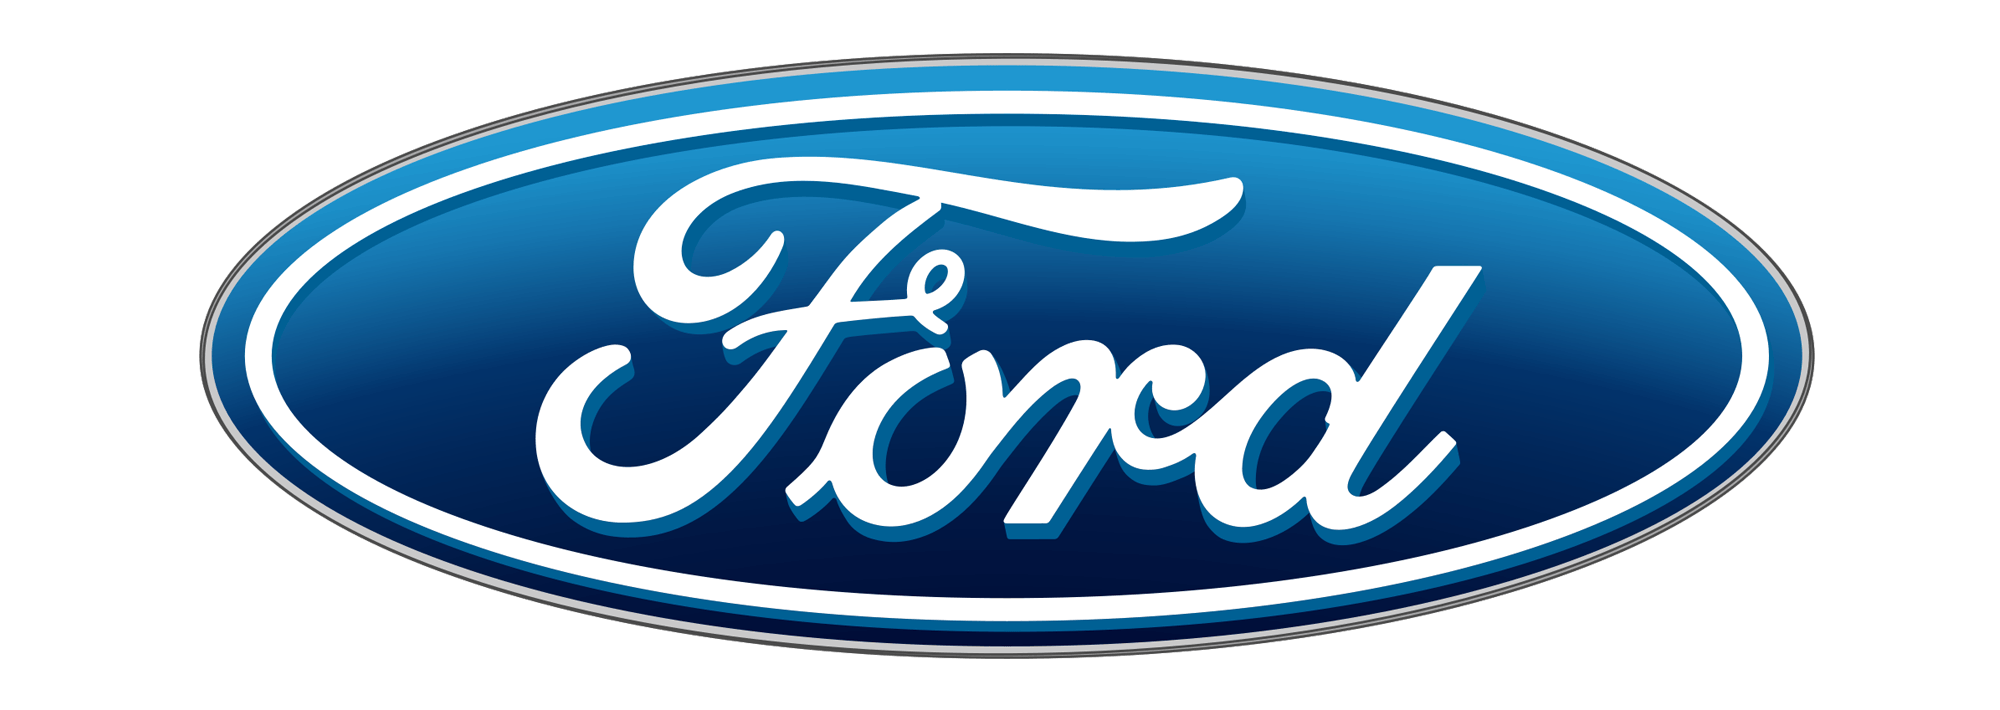 Brand with Blue Oval Logo - Ford Logo Meaning and History, latest models. World Cars Brands